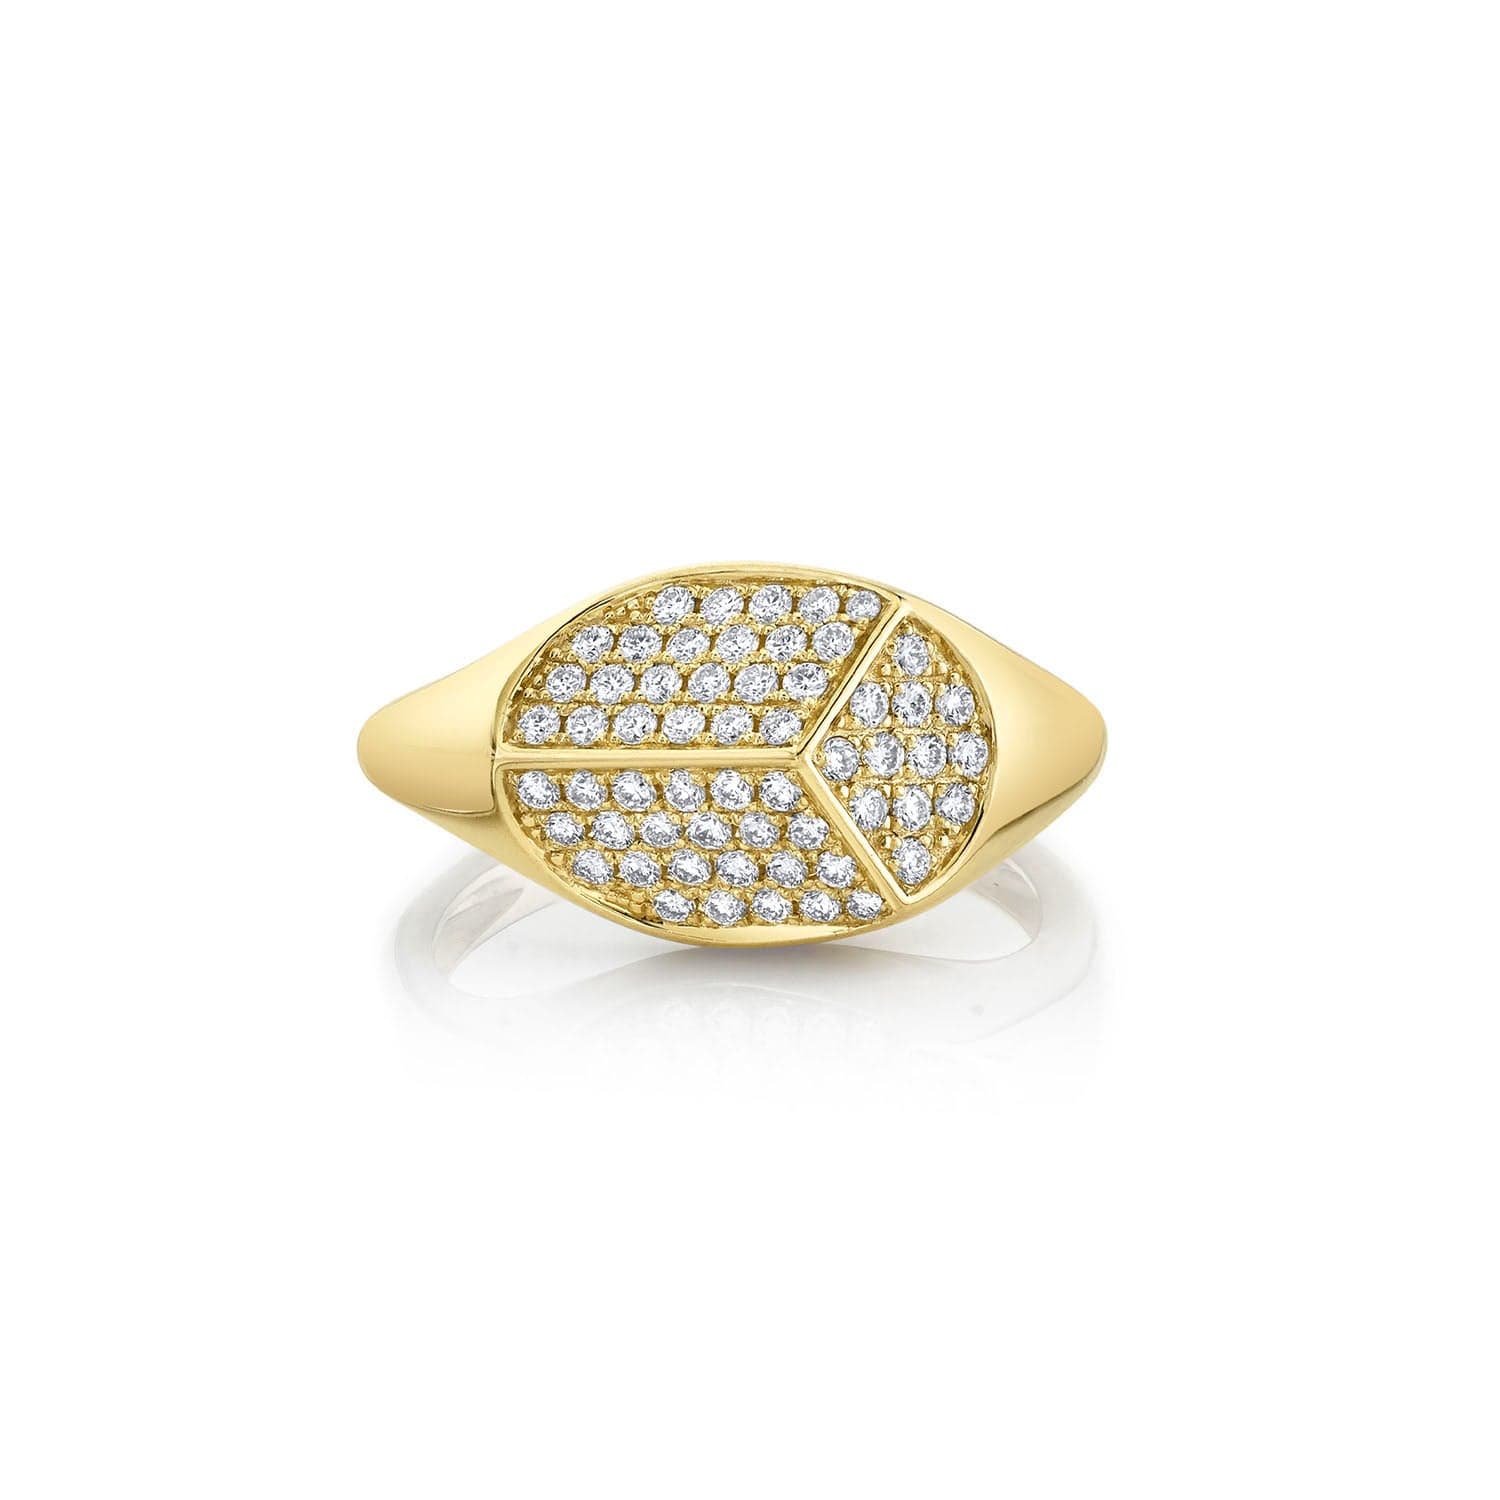 MICHAEL M Fashion Rings 14K Yellow Gold / 6.5 Carve Signet Ring with Pavé F465